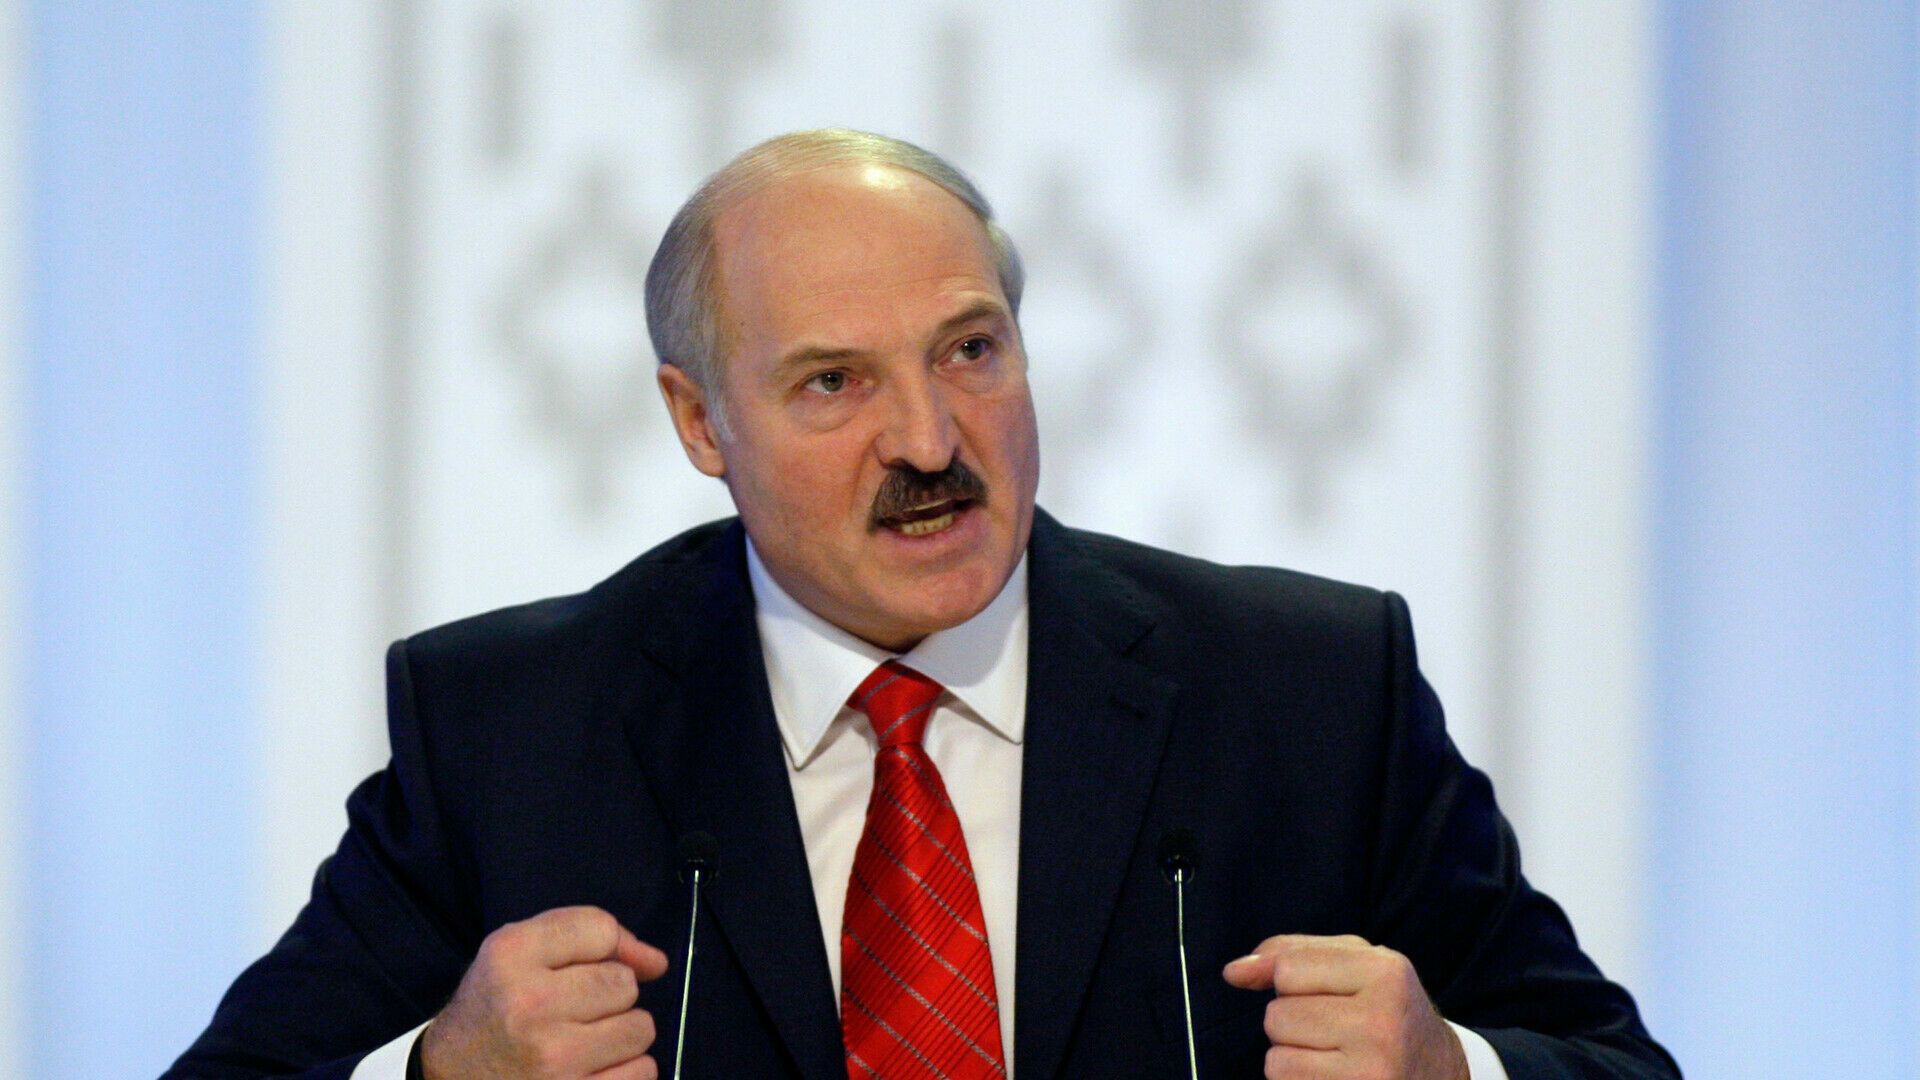 Lessons of mockery: Lukashenko stated that freedom of speech in Belarus has become extremism